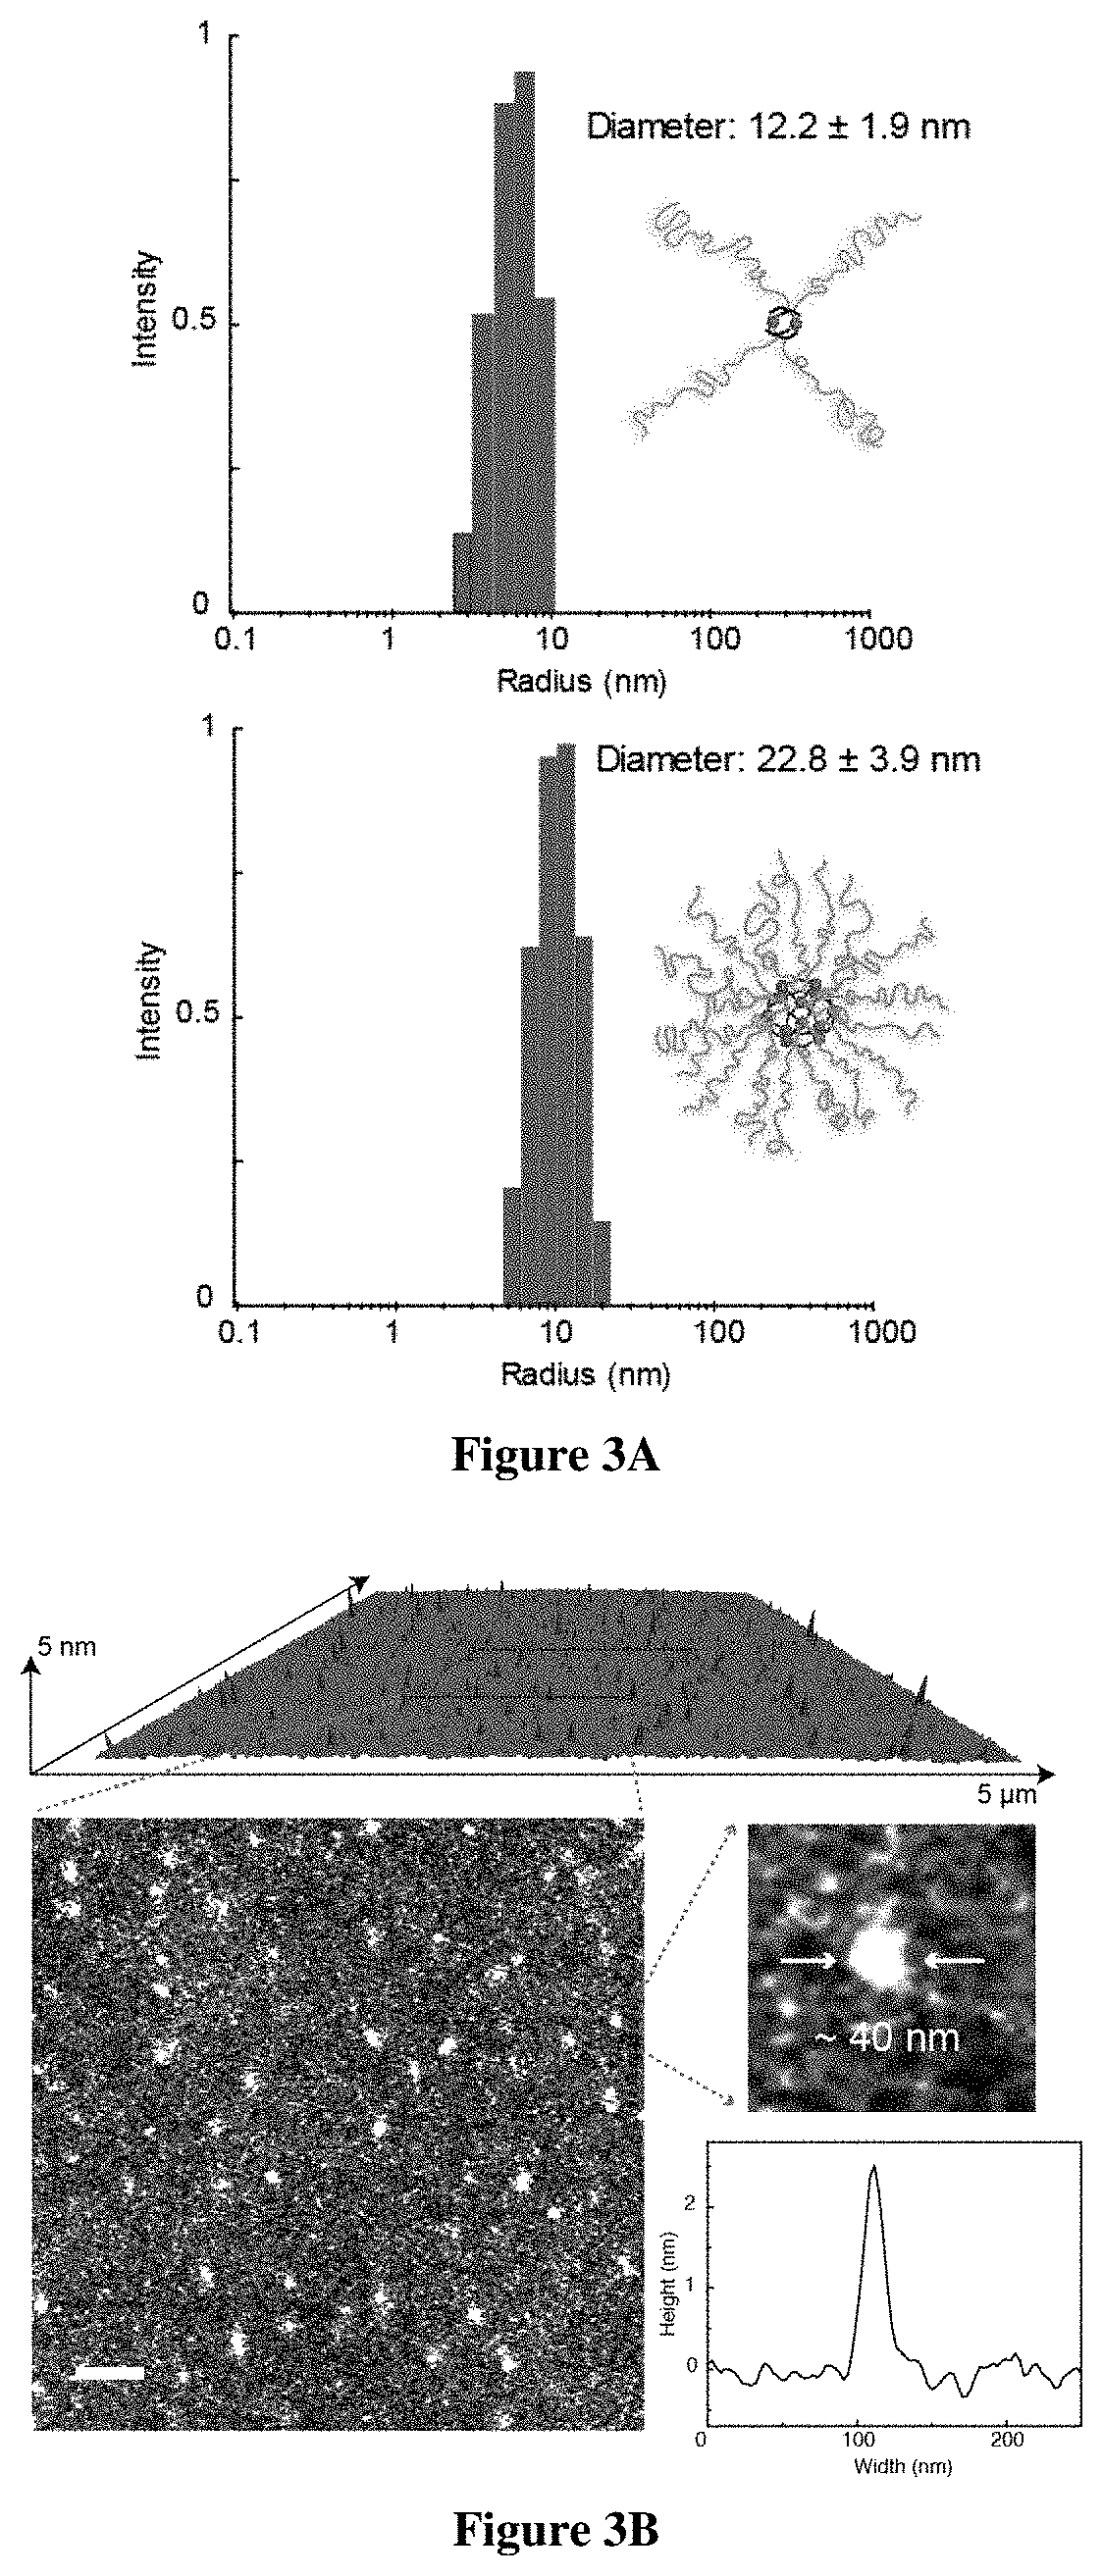 Block co-poly(metal organic nanostructures) (BCPMONs) and uses thereof